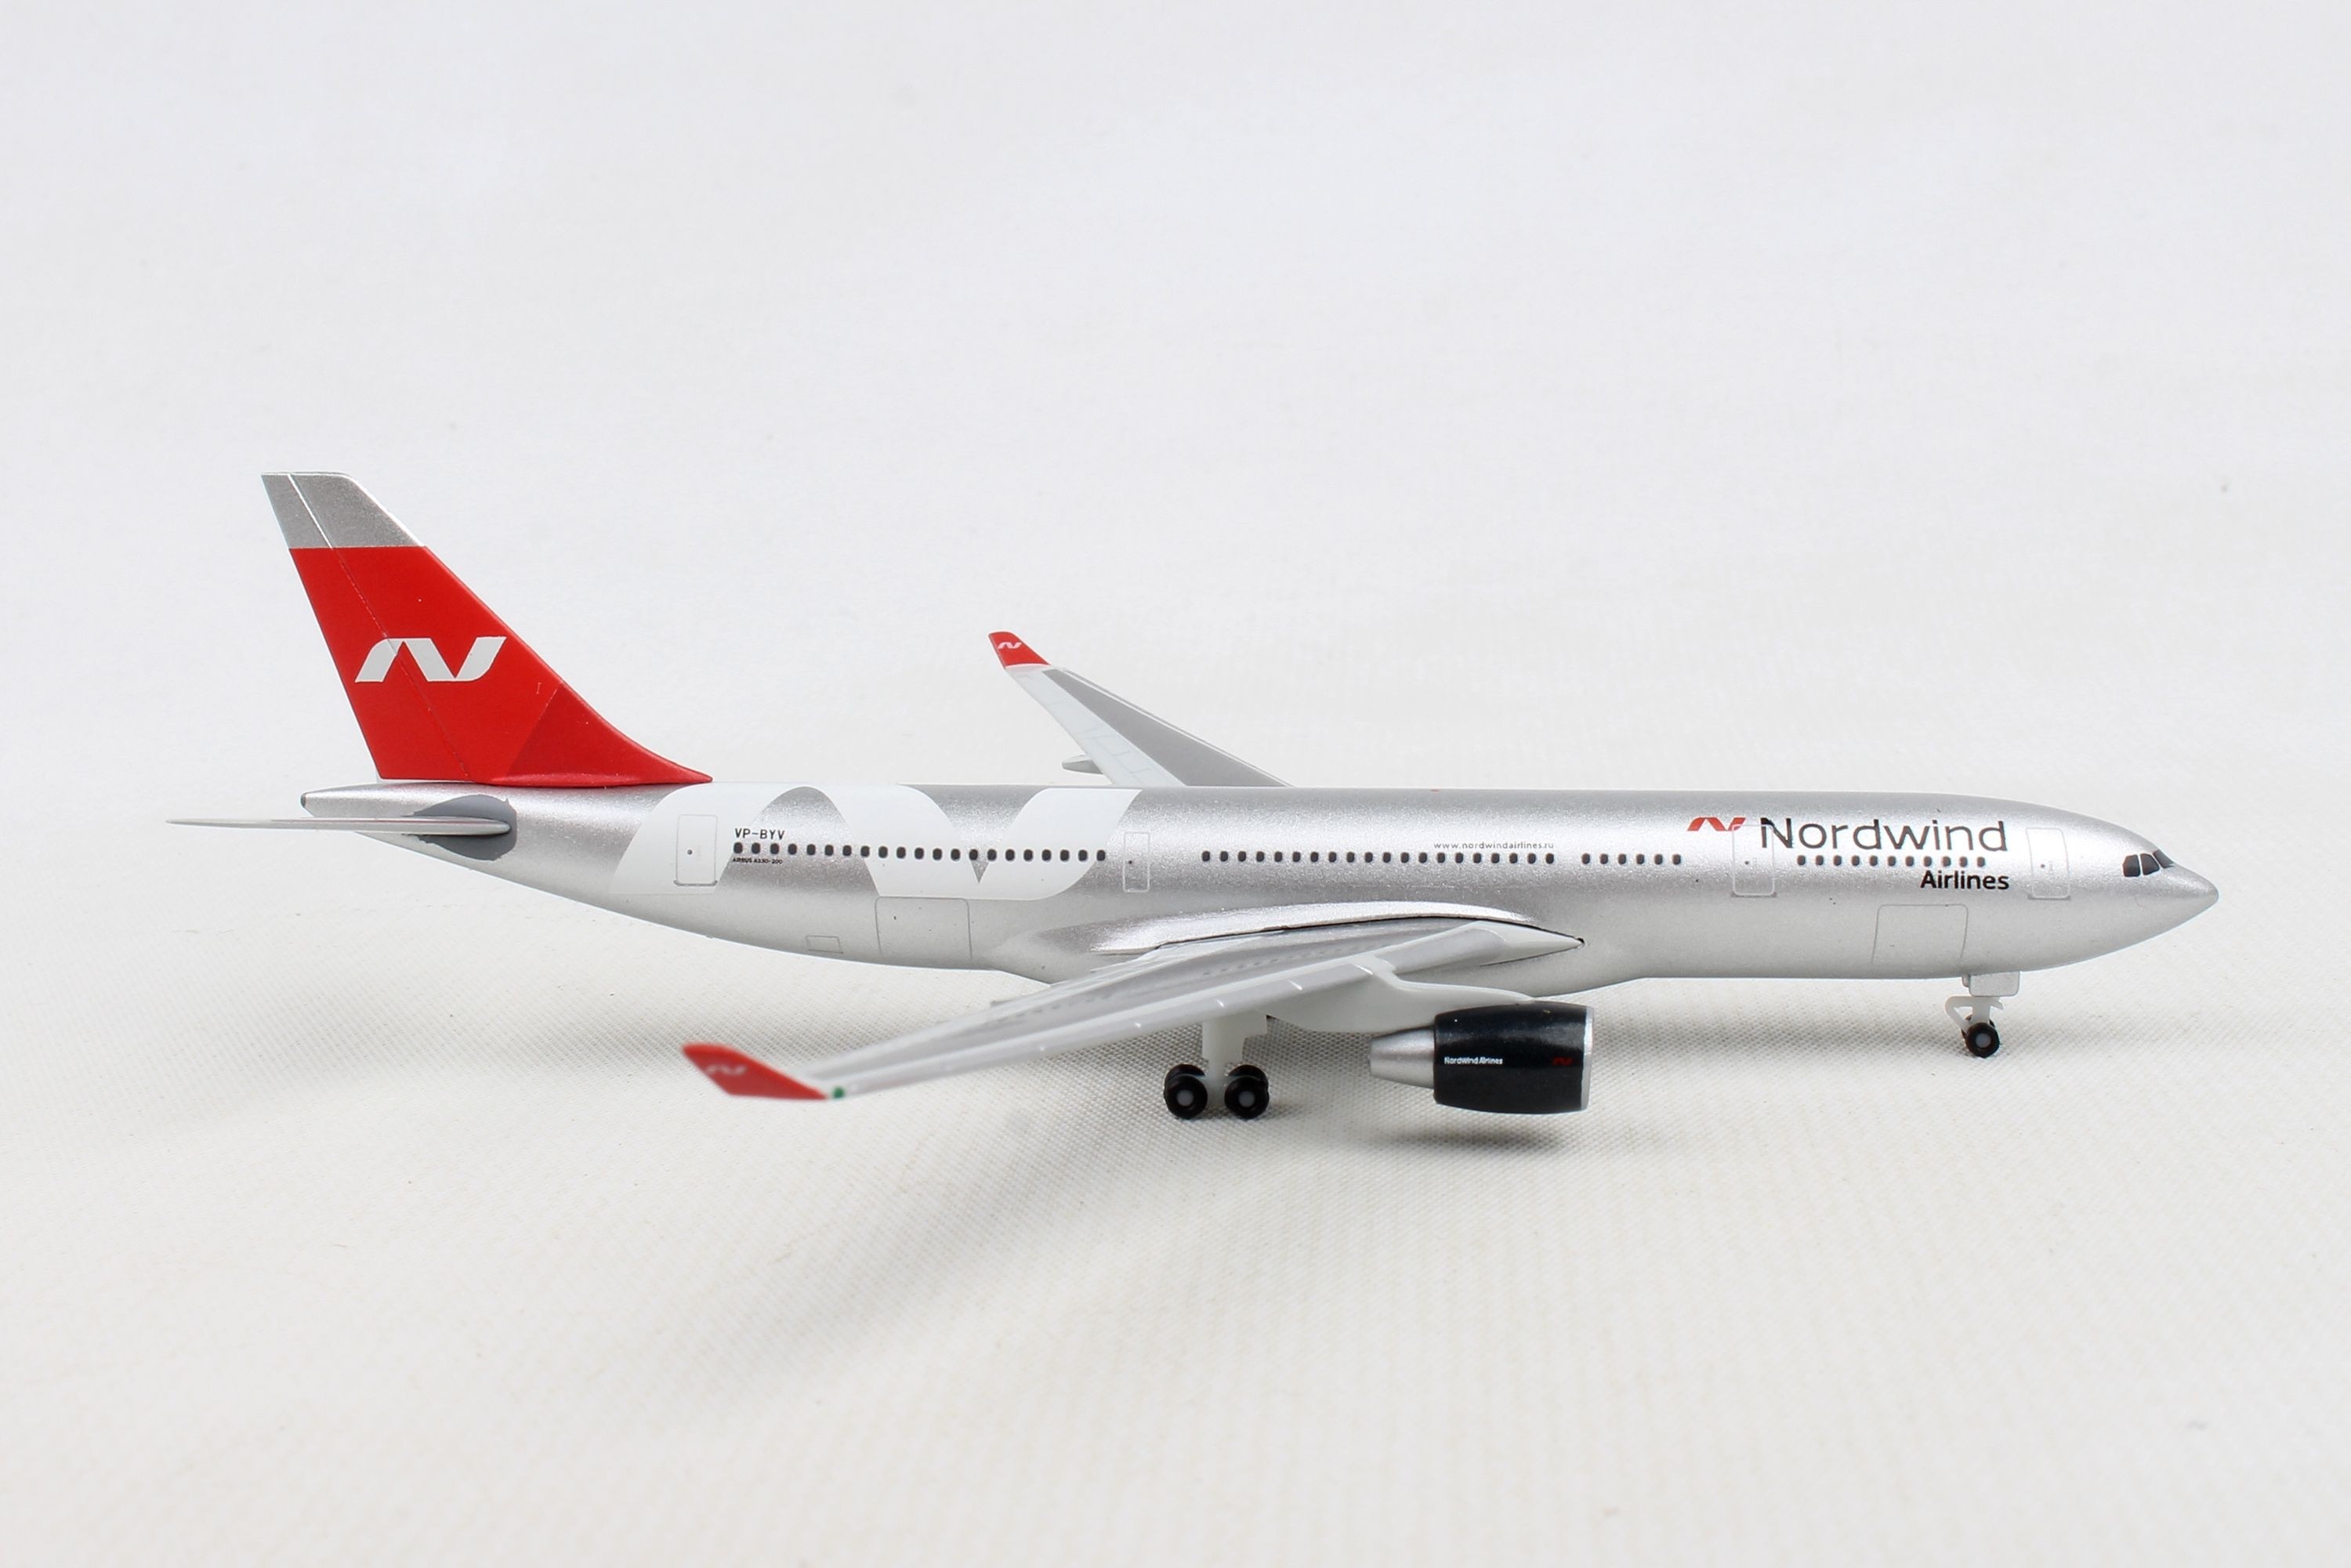 NUOVO Herpa 531771-1/500 Northwind Airlines Airbus a330-200 